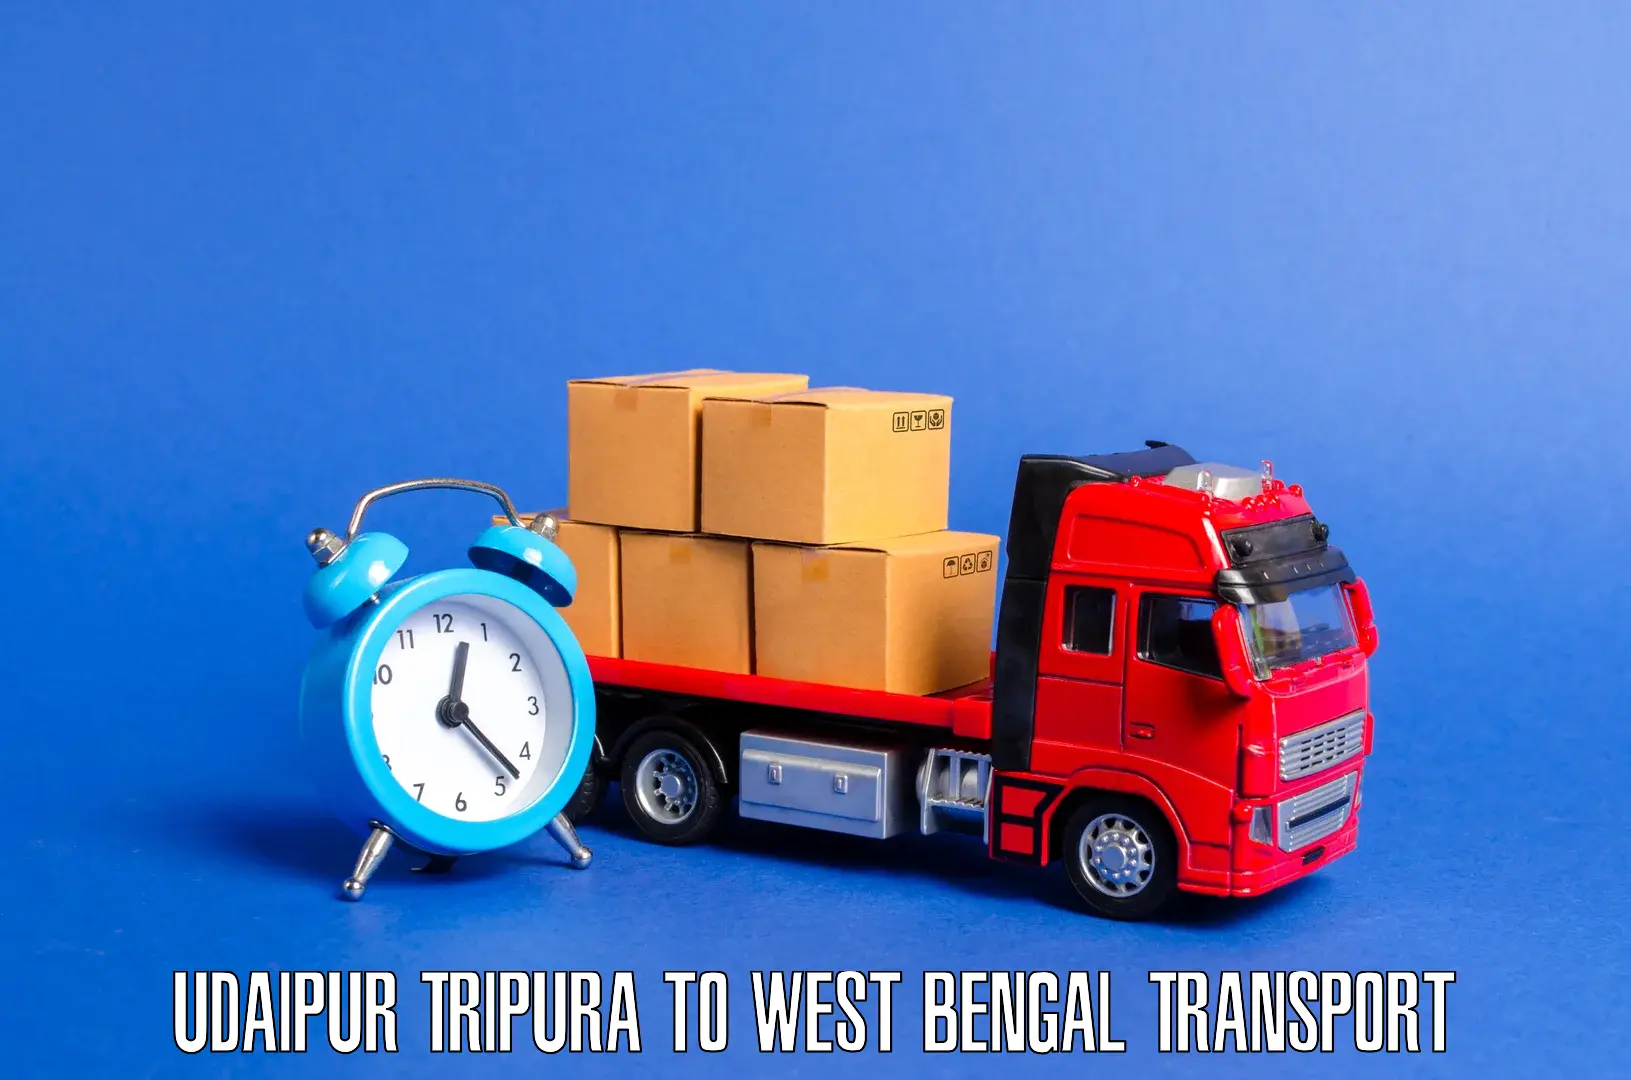 Transport bike from one state to another Udaipur Tripura to Panjipara